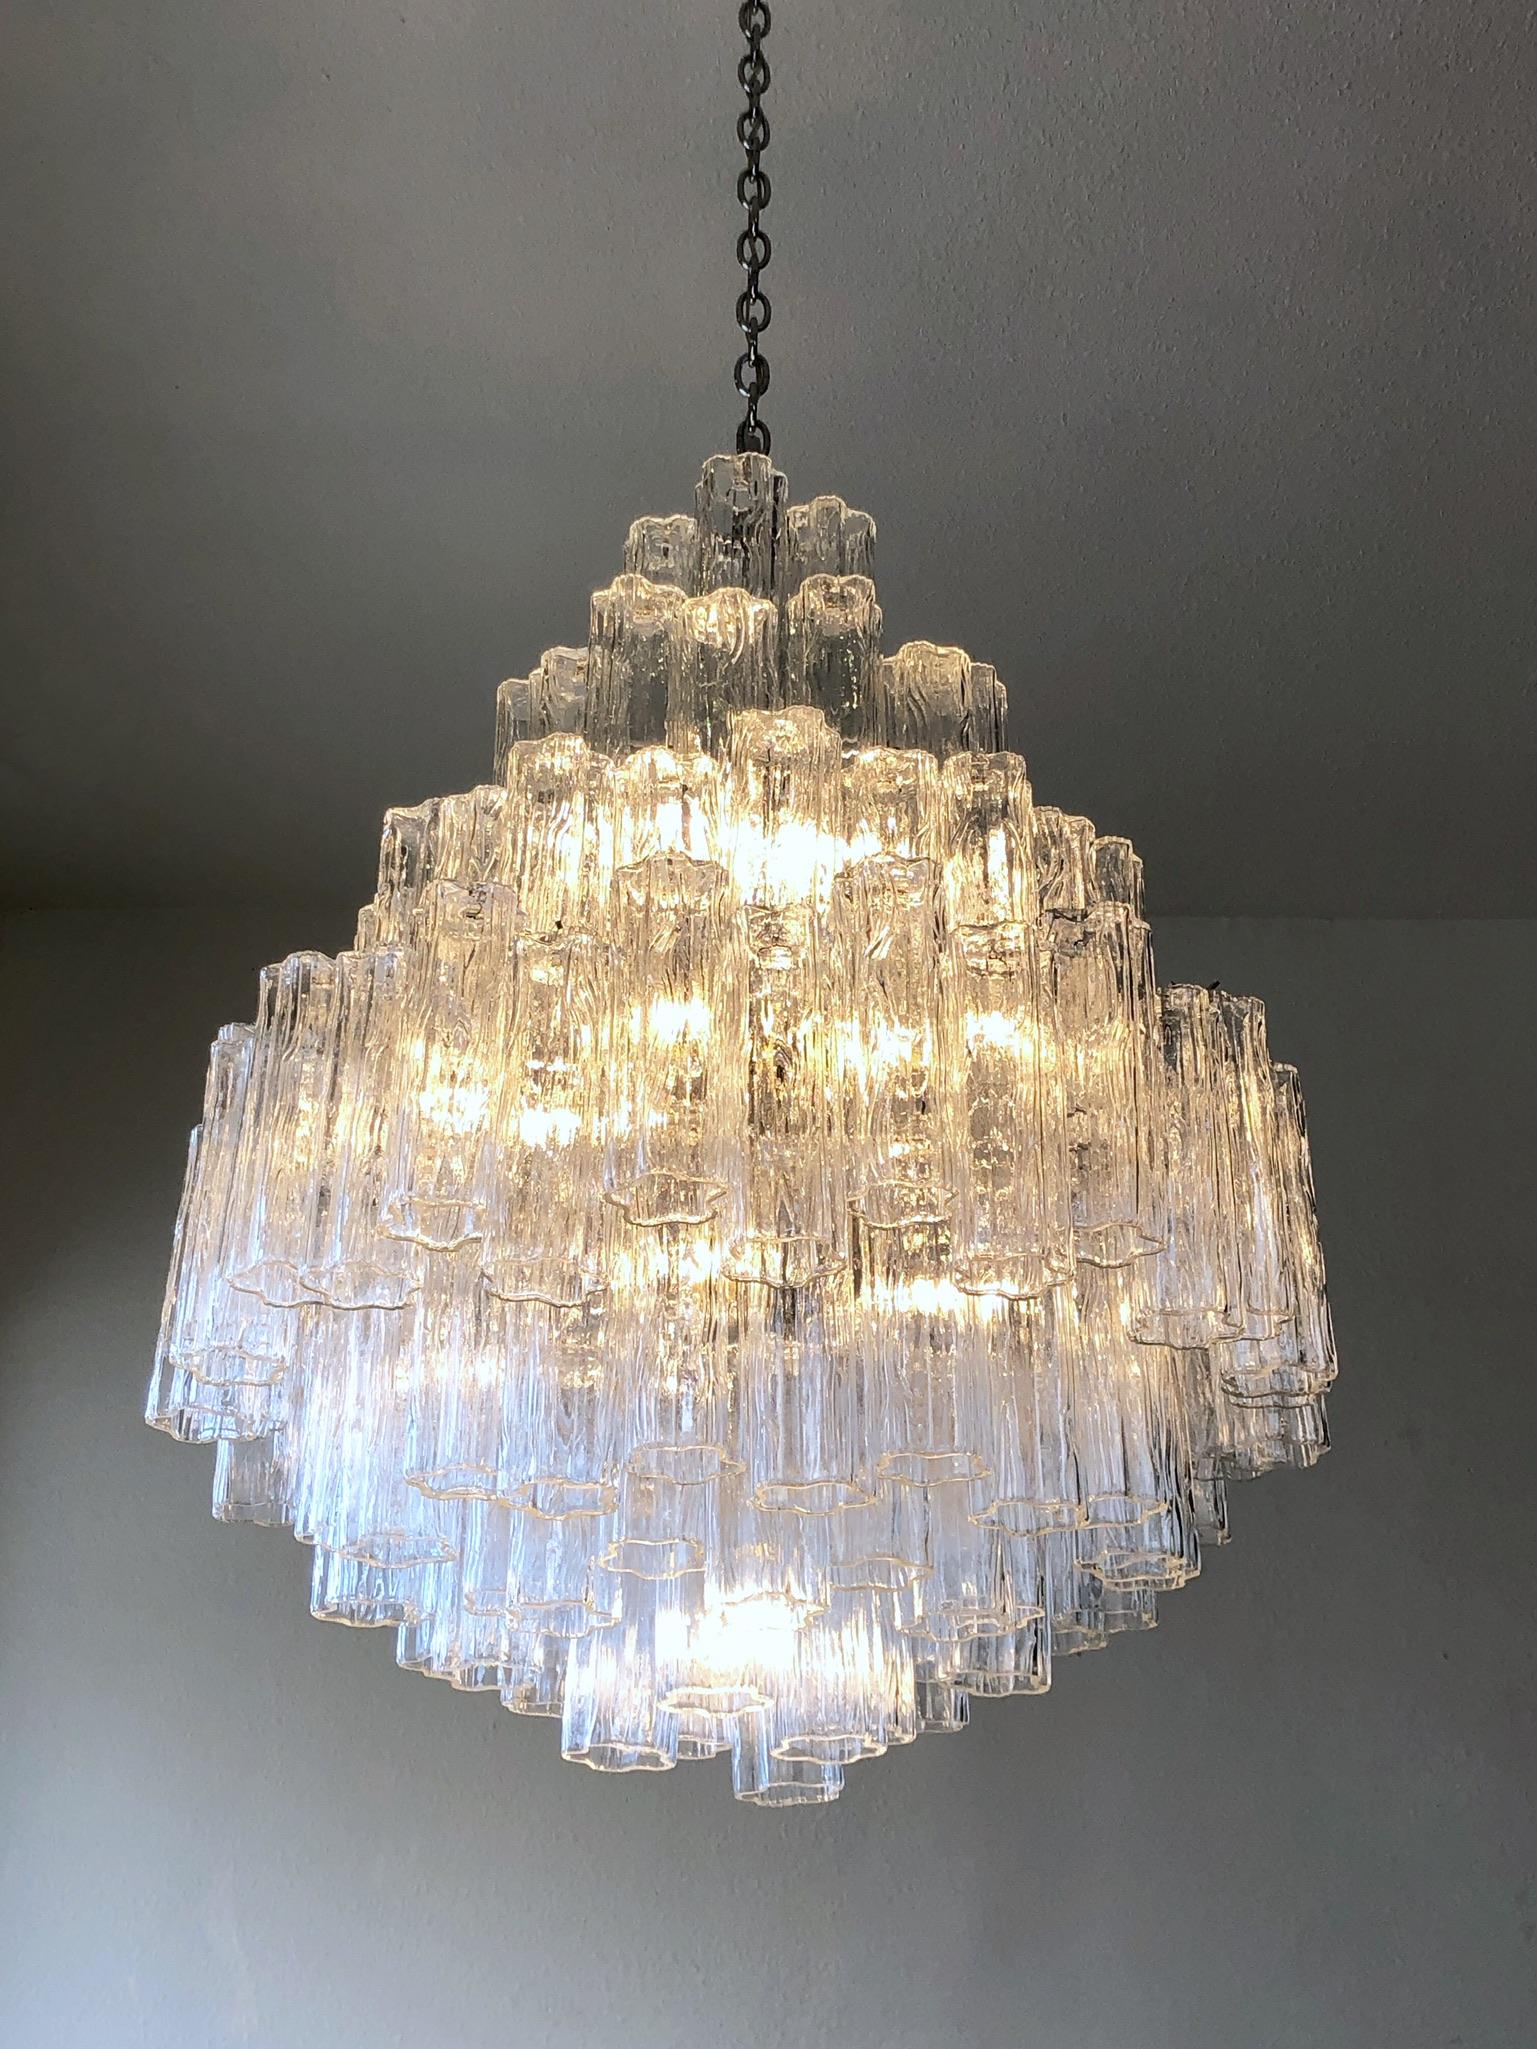 A glamorous 1970s Italian clear Murano glass ‘Tronchi’ chandelier by Venini.
The skeleton and hardware is polish chrome.
The prisms are two different size and it takes twelve regular Edison lightbulb.
Measurements without chain: 41” high, 30”